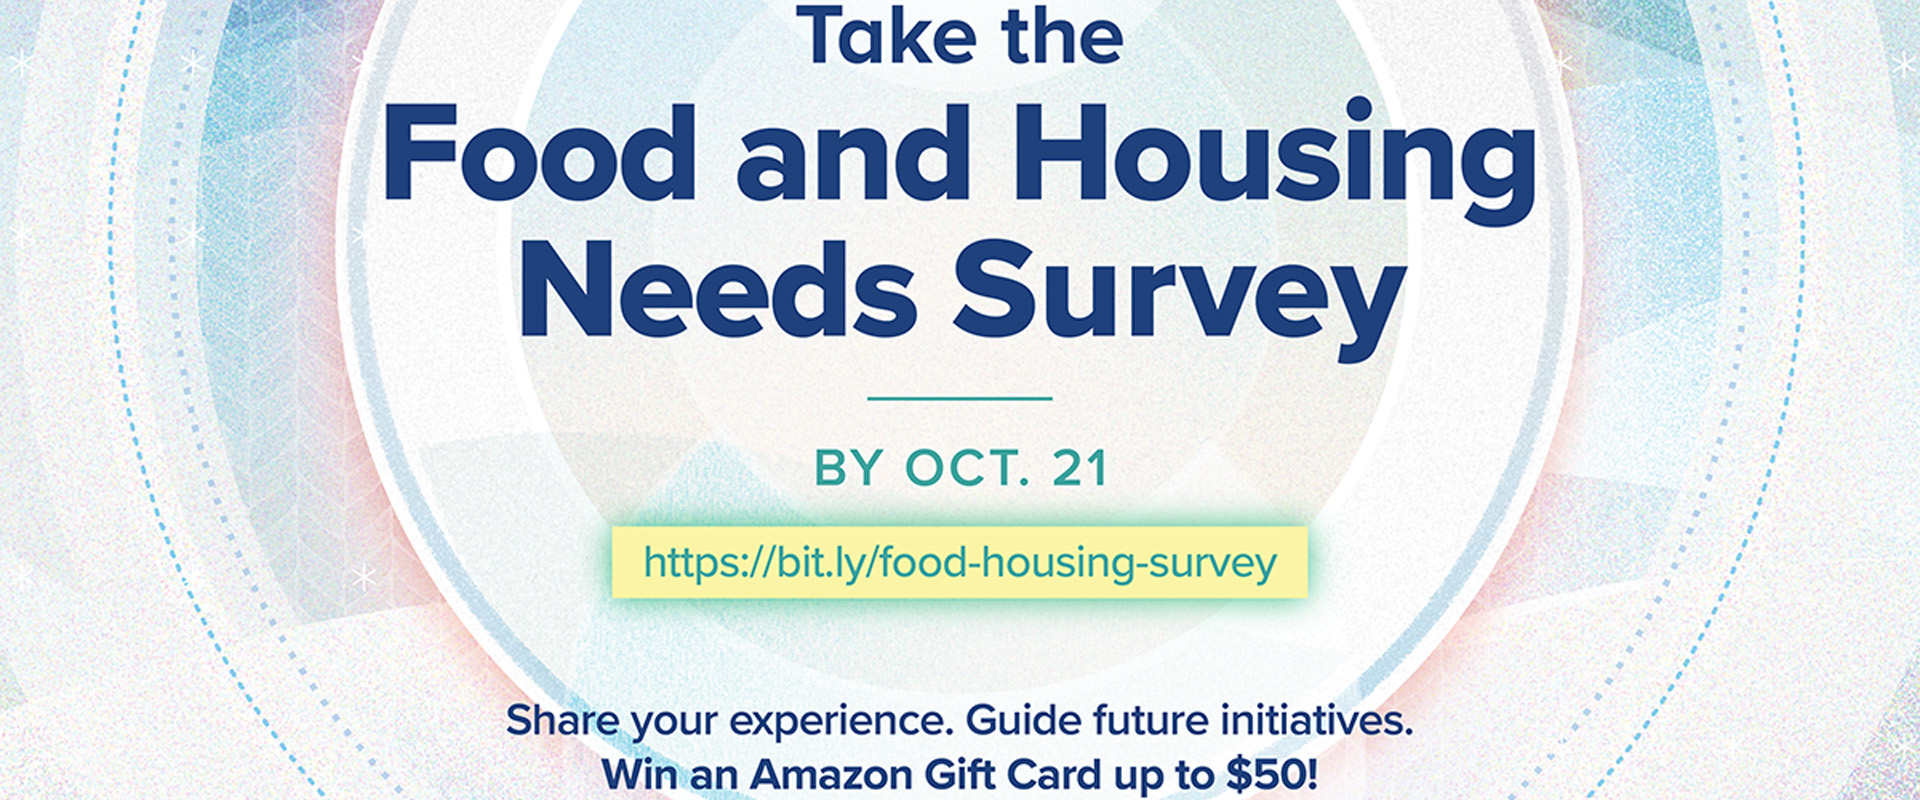 Food and Housing Needs Survey Graphic